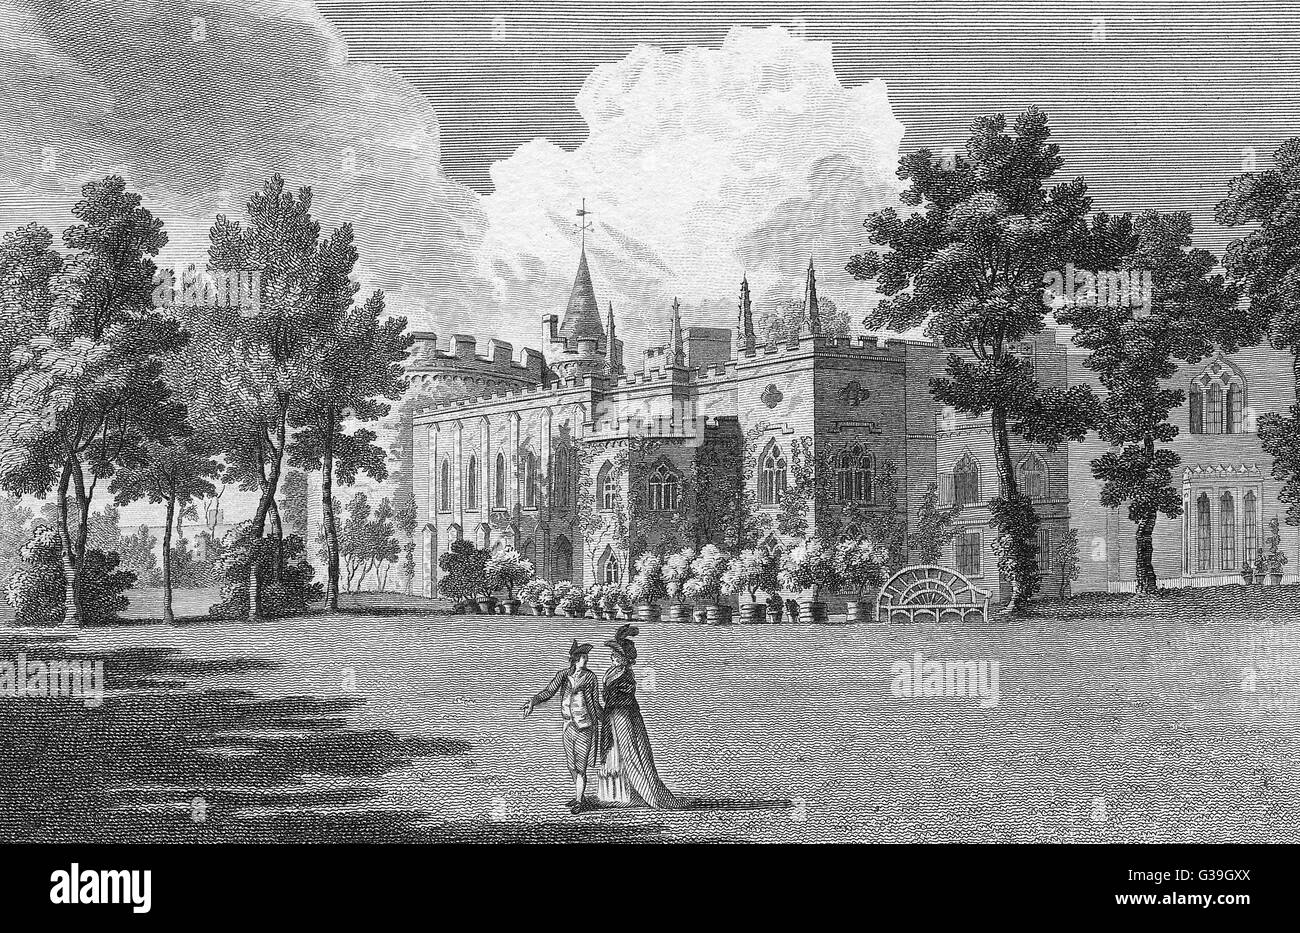 HORACE (HORATIO) WALPOLE FOURTH EARL OF OXFORD Grounds of Strawberry Hill, near Twickenham, home of  the English gothic novelist  and man of letters     Date: 1717 - 1797 Stock Photo